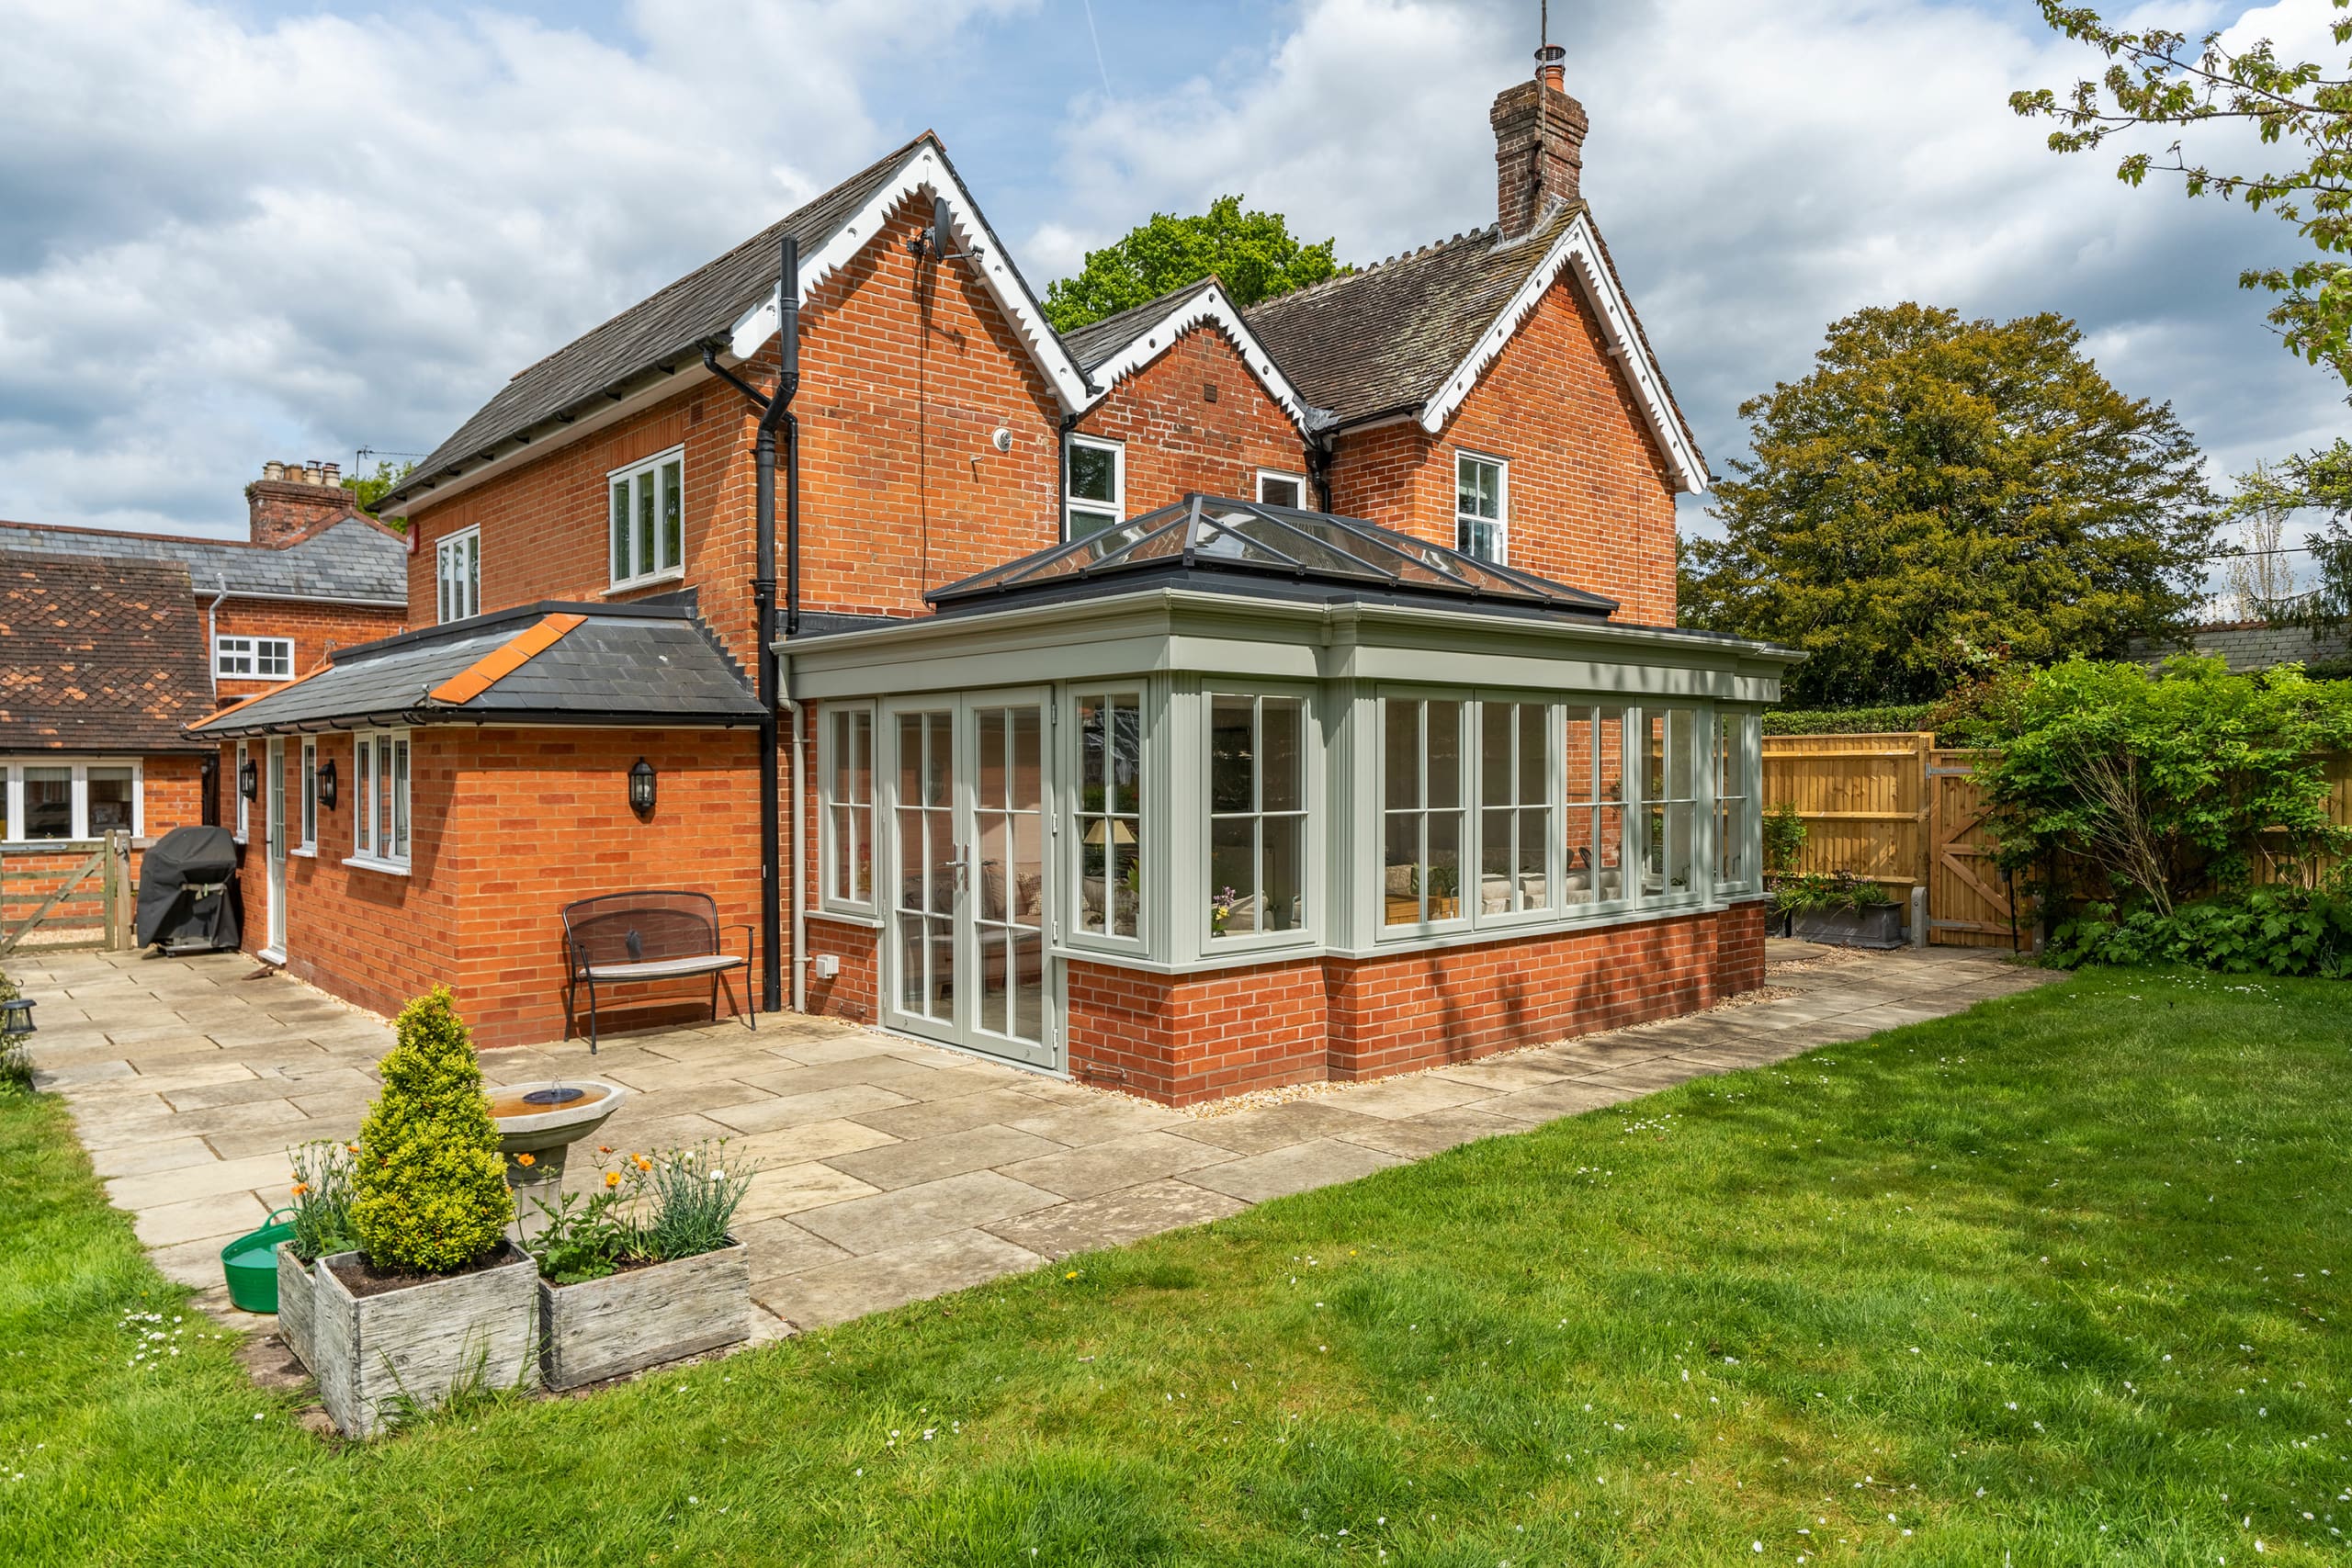 Substantial red brick house with traditional modern orangery extension finished with olive green framing.